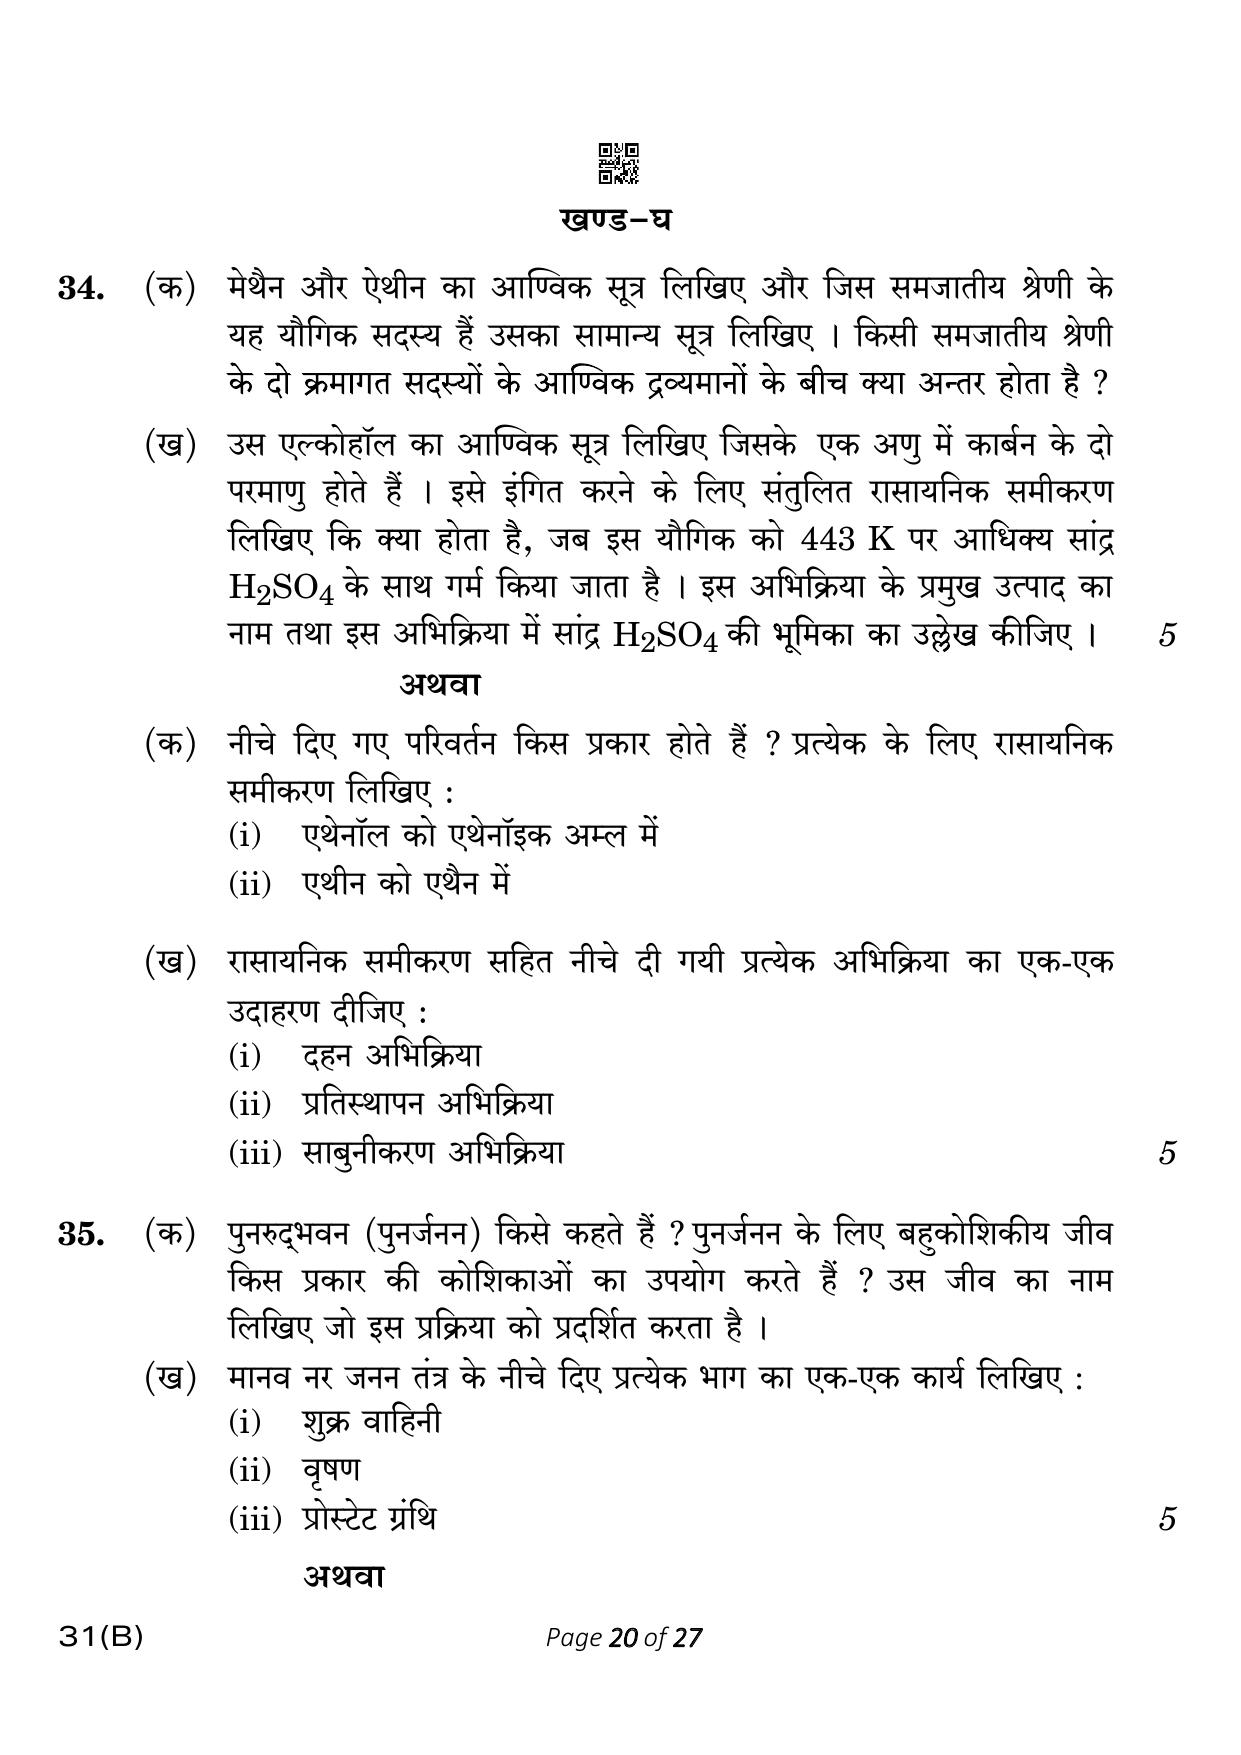 CBSE Class 10 31-B Science 2023 (Compartment) Question Paper - Page 20